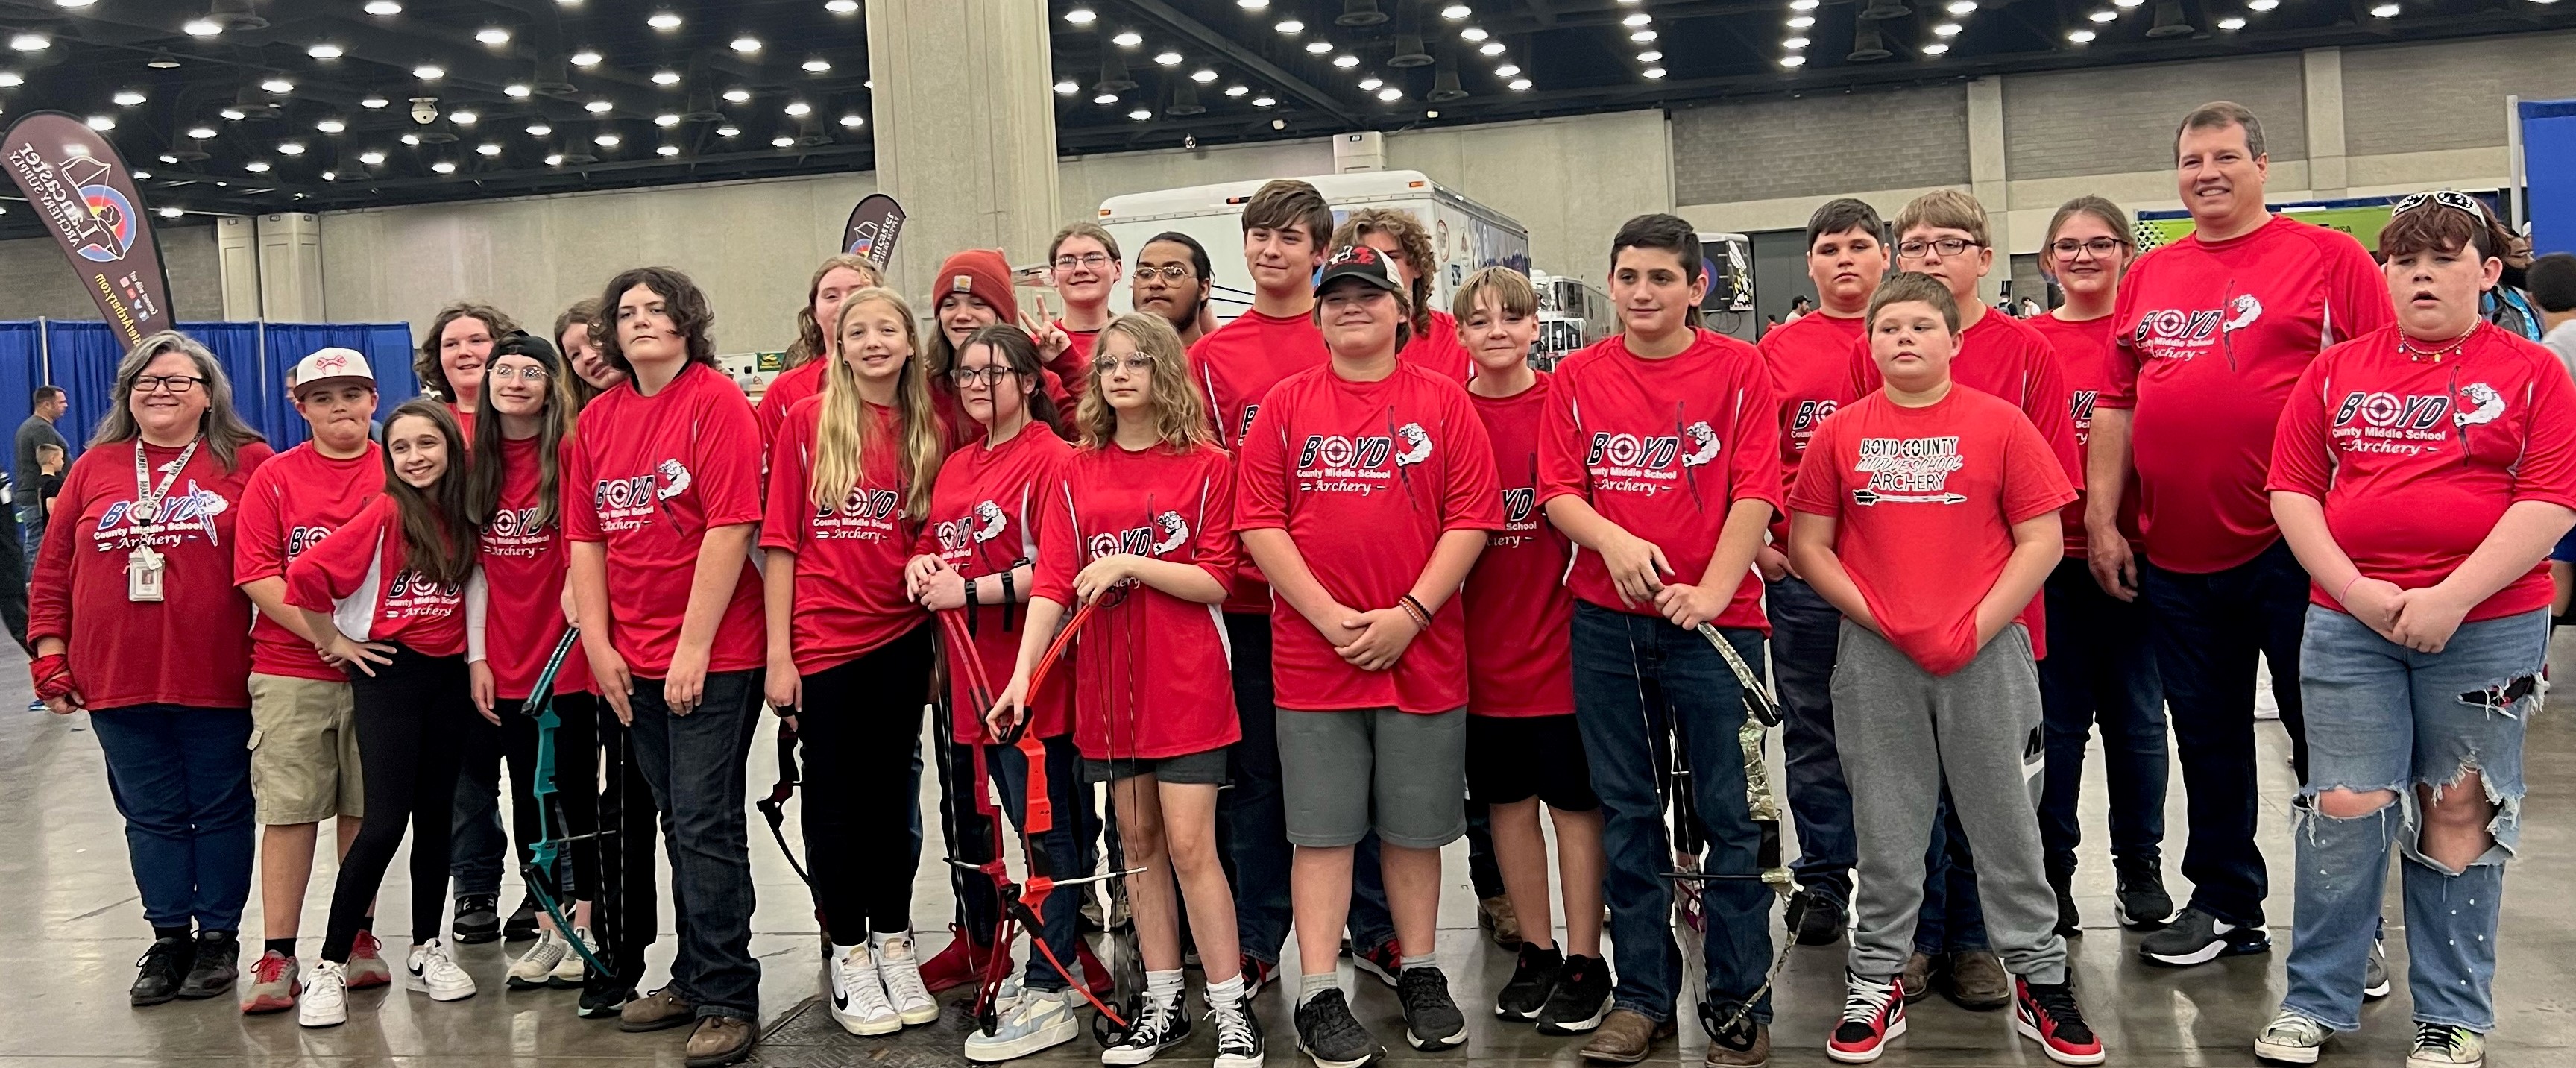 Aiming for Success: Boyd County Middle School Archery Team Earns Consecutive Trips to Nationals